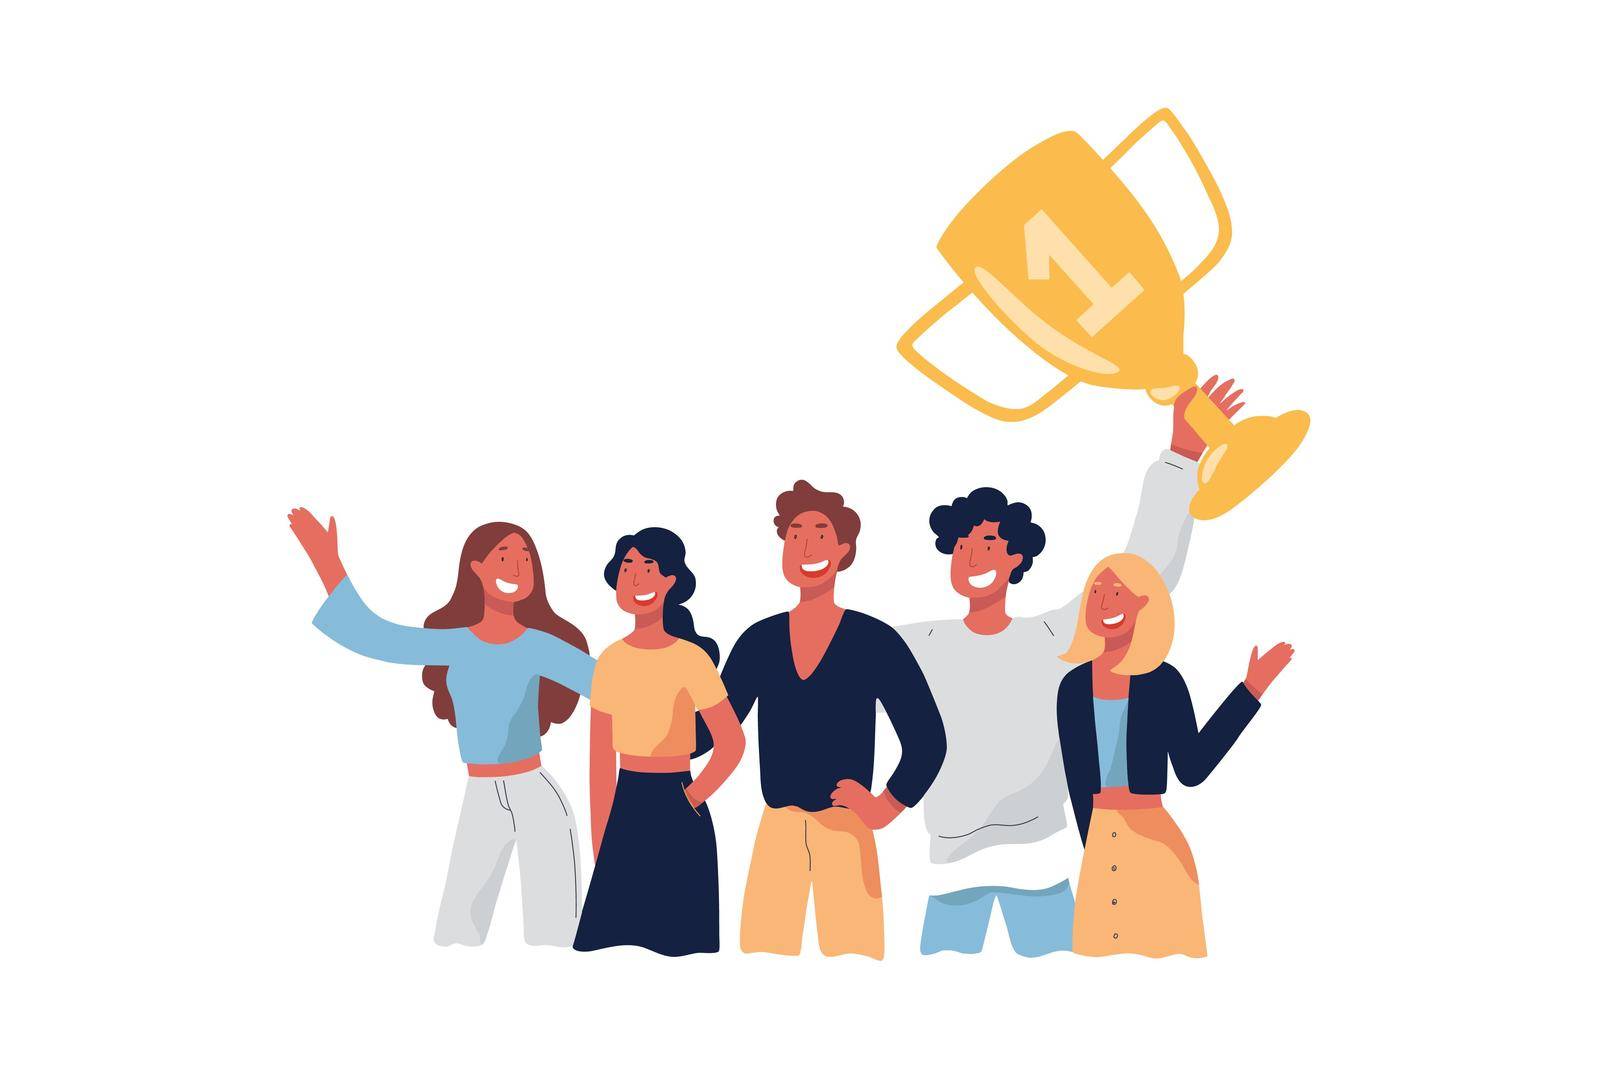 Team celebrating victory, smiling people, champions holding gold cup, trophy, victorious gesture, goal achievement. Successful men, women winning prize concept cartoon sketch. Flat vector illustration